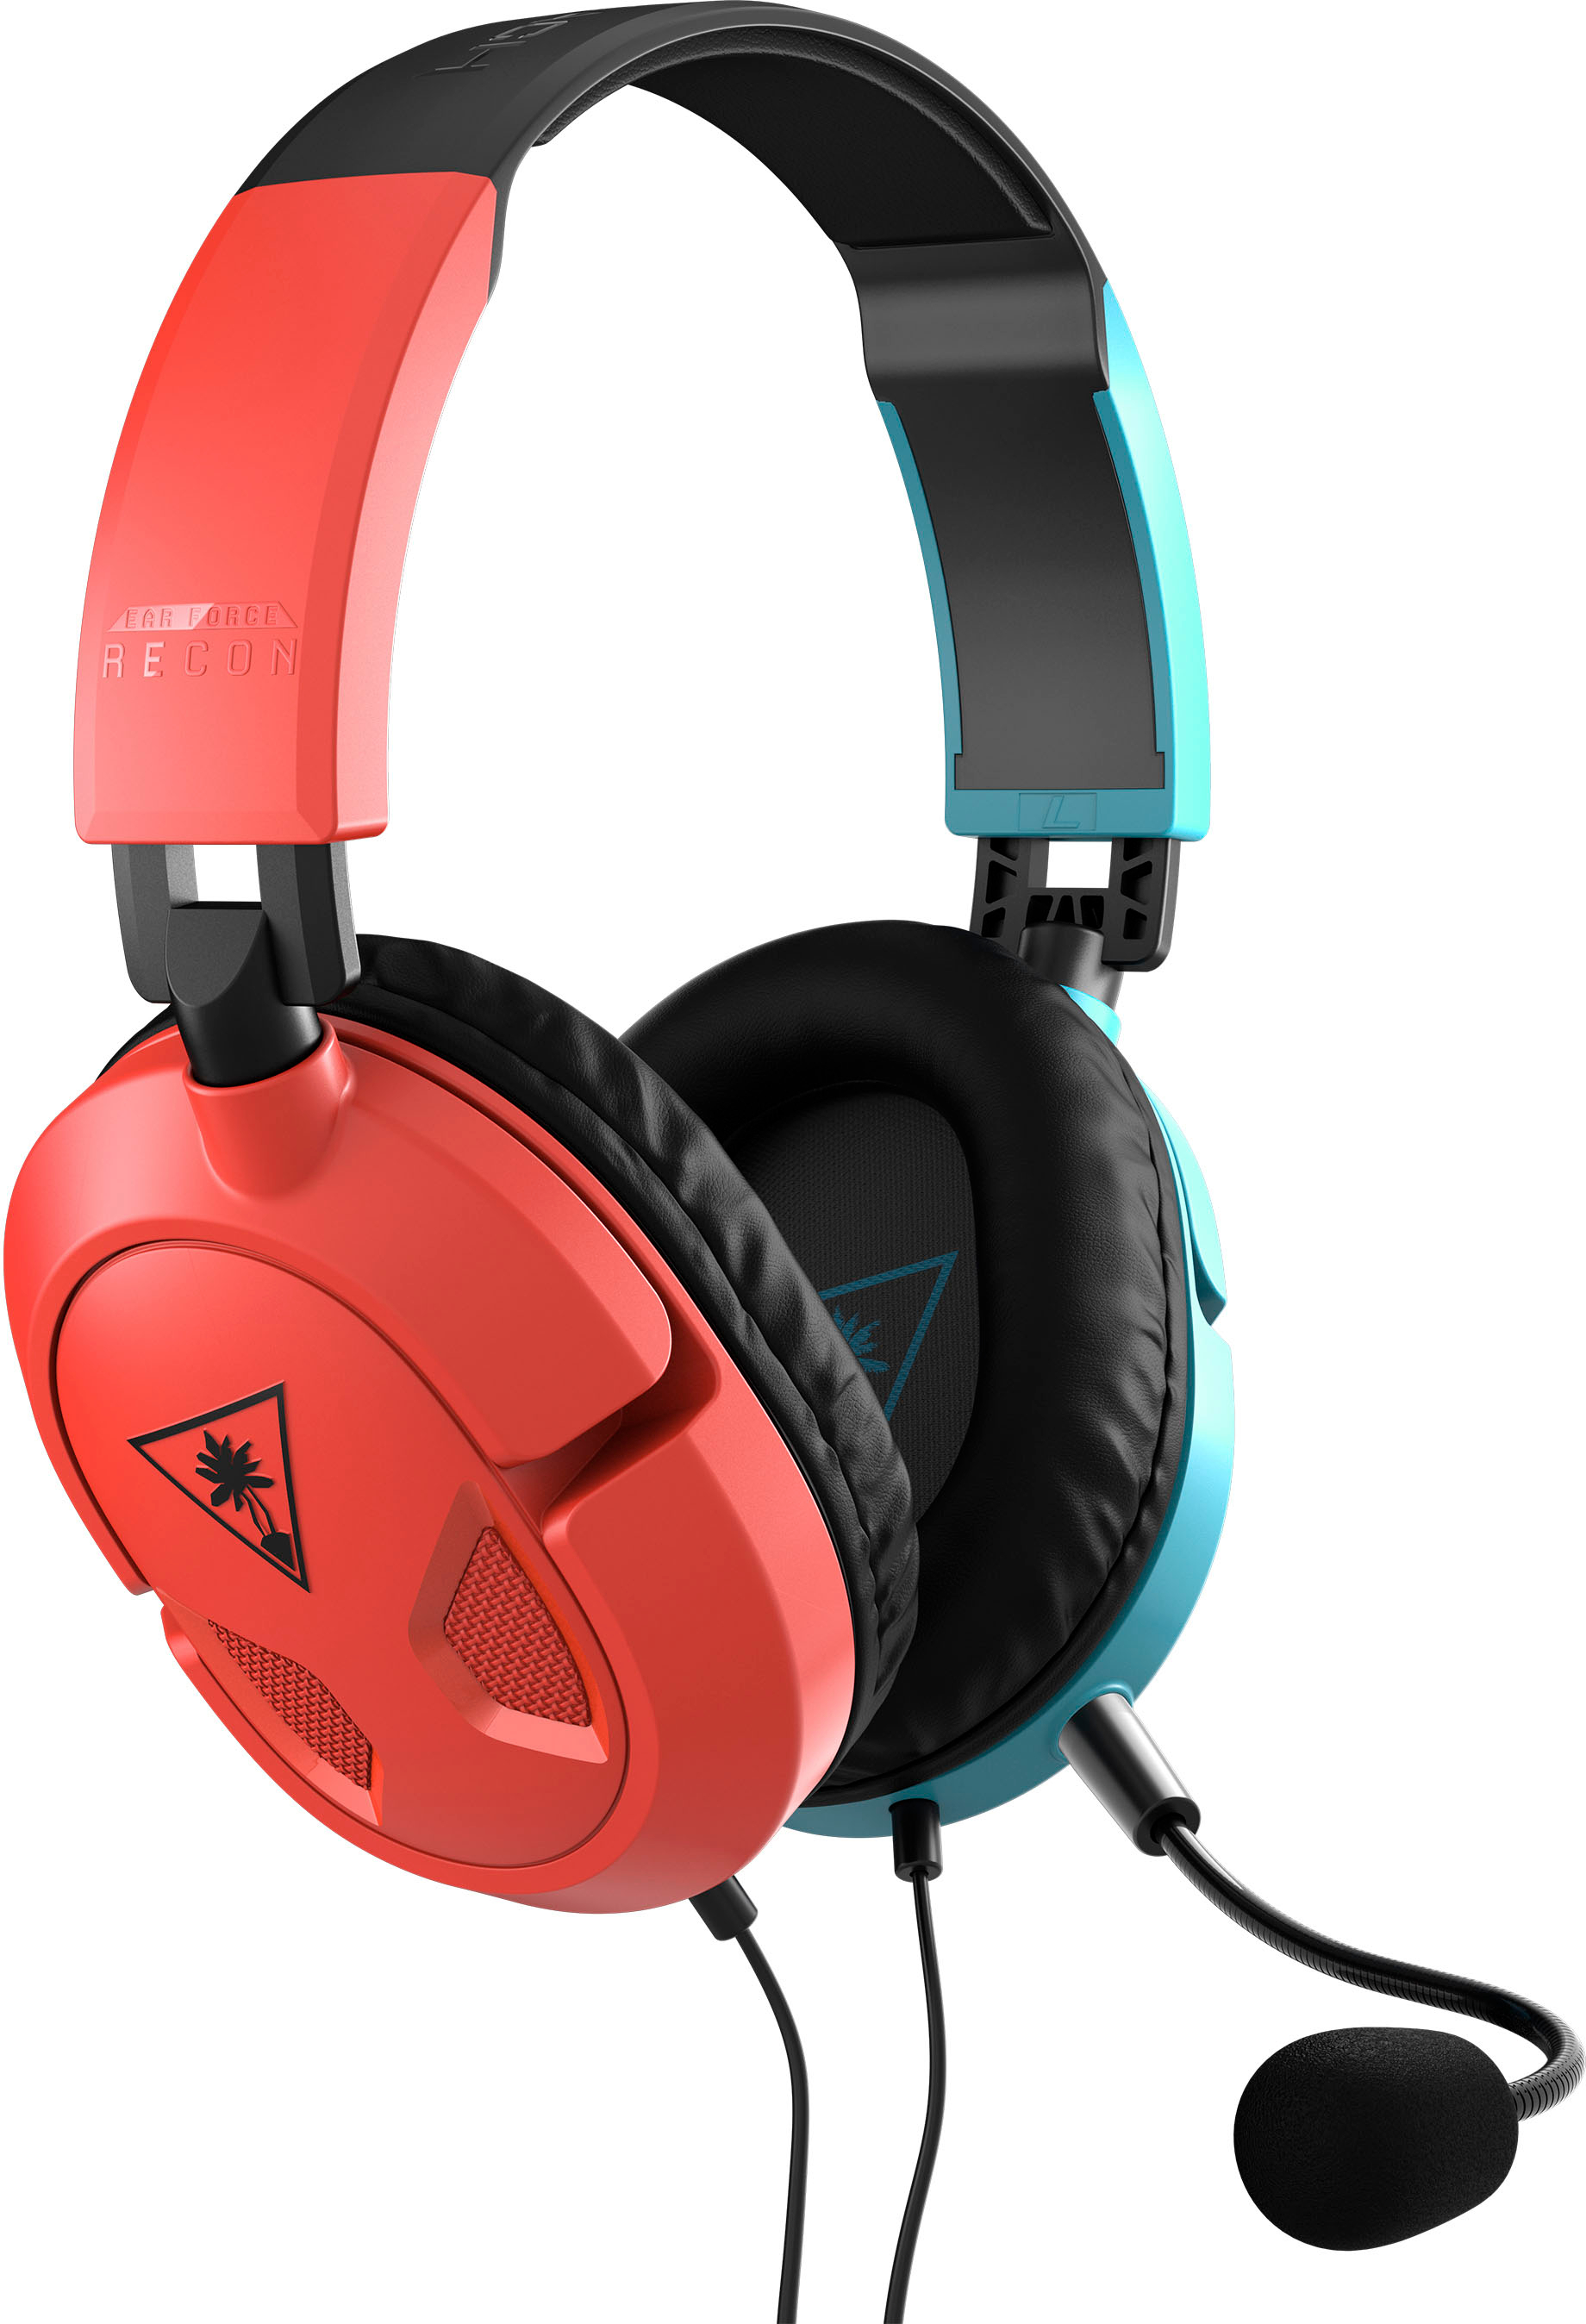 Turtle Beach Recon Headset TBS-8150-05 Best Wired - 50 Buy for Gaming Switch Red/Blue Nintendo